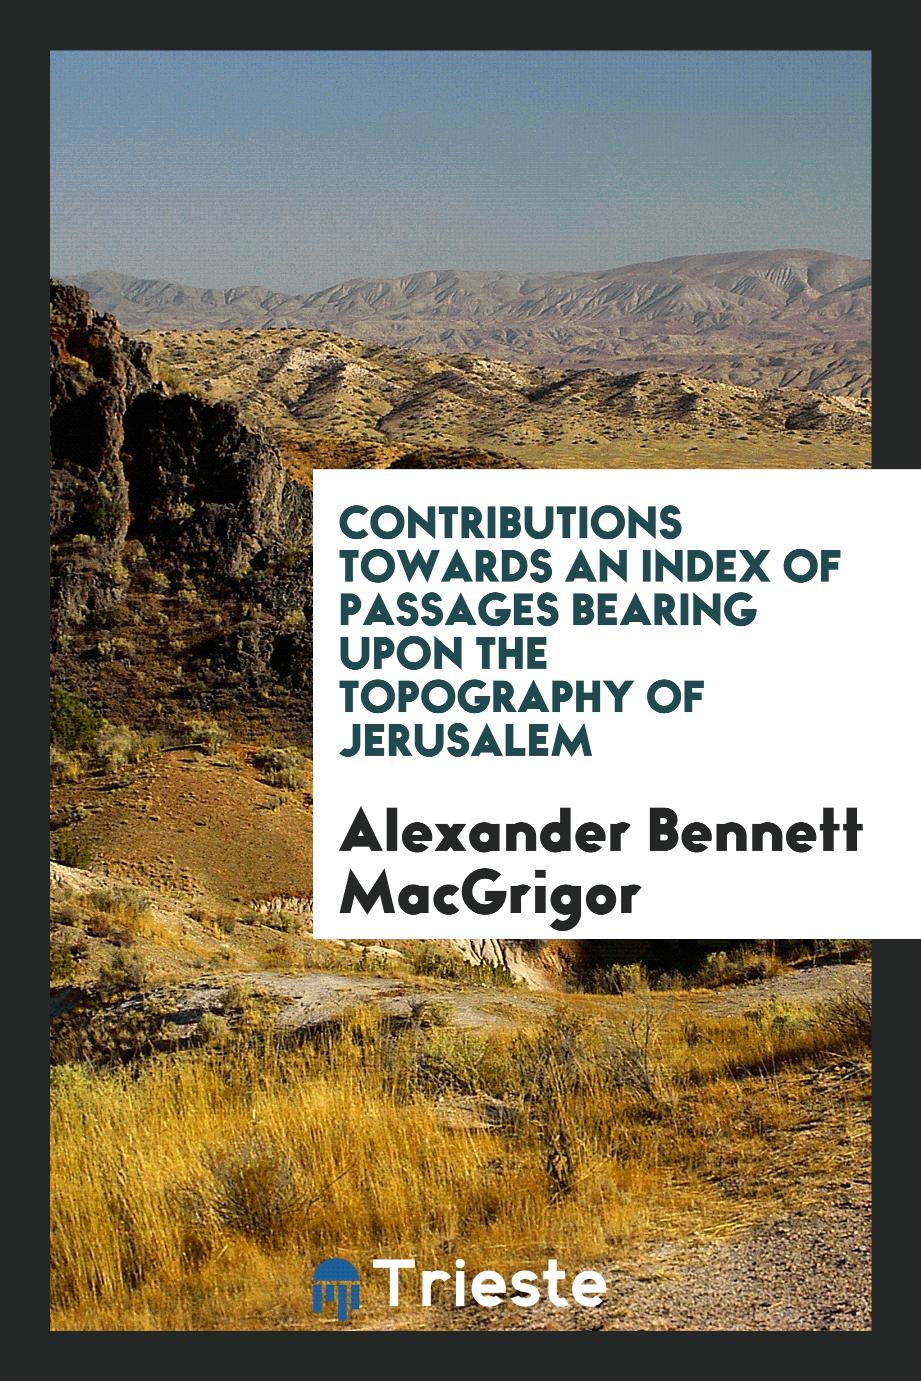 Contributions Towards an Index of Passages Bearing Upon the Topography of Jerusalem